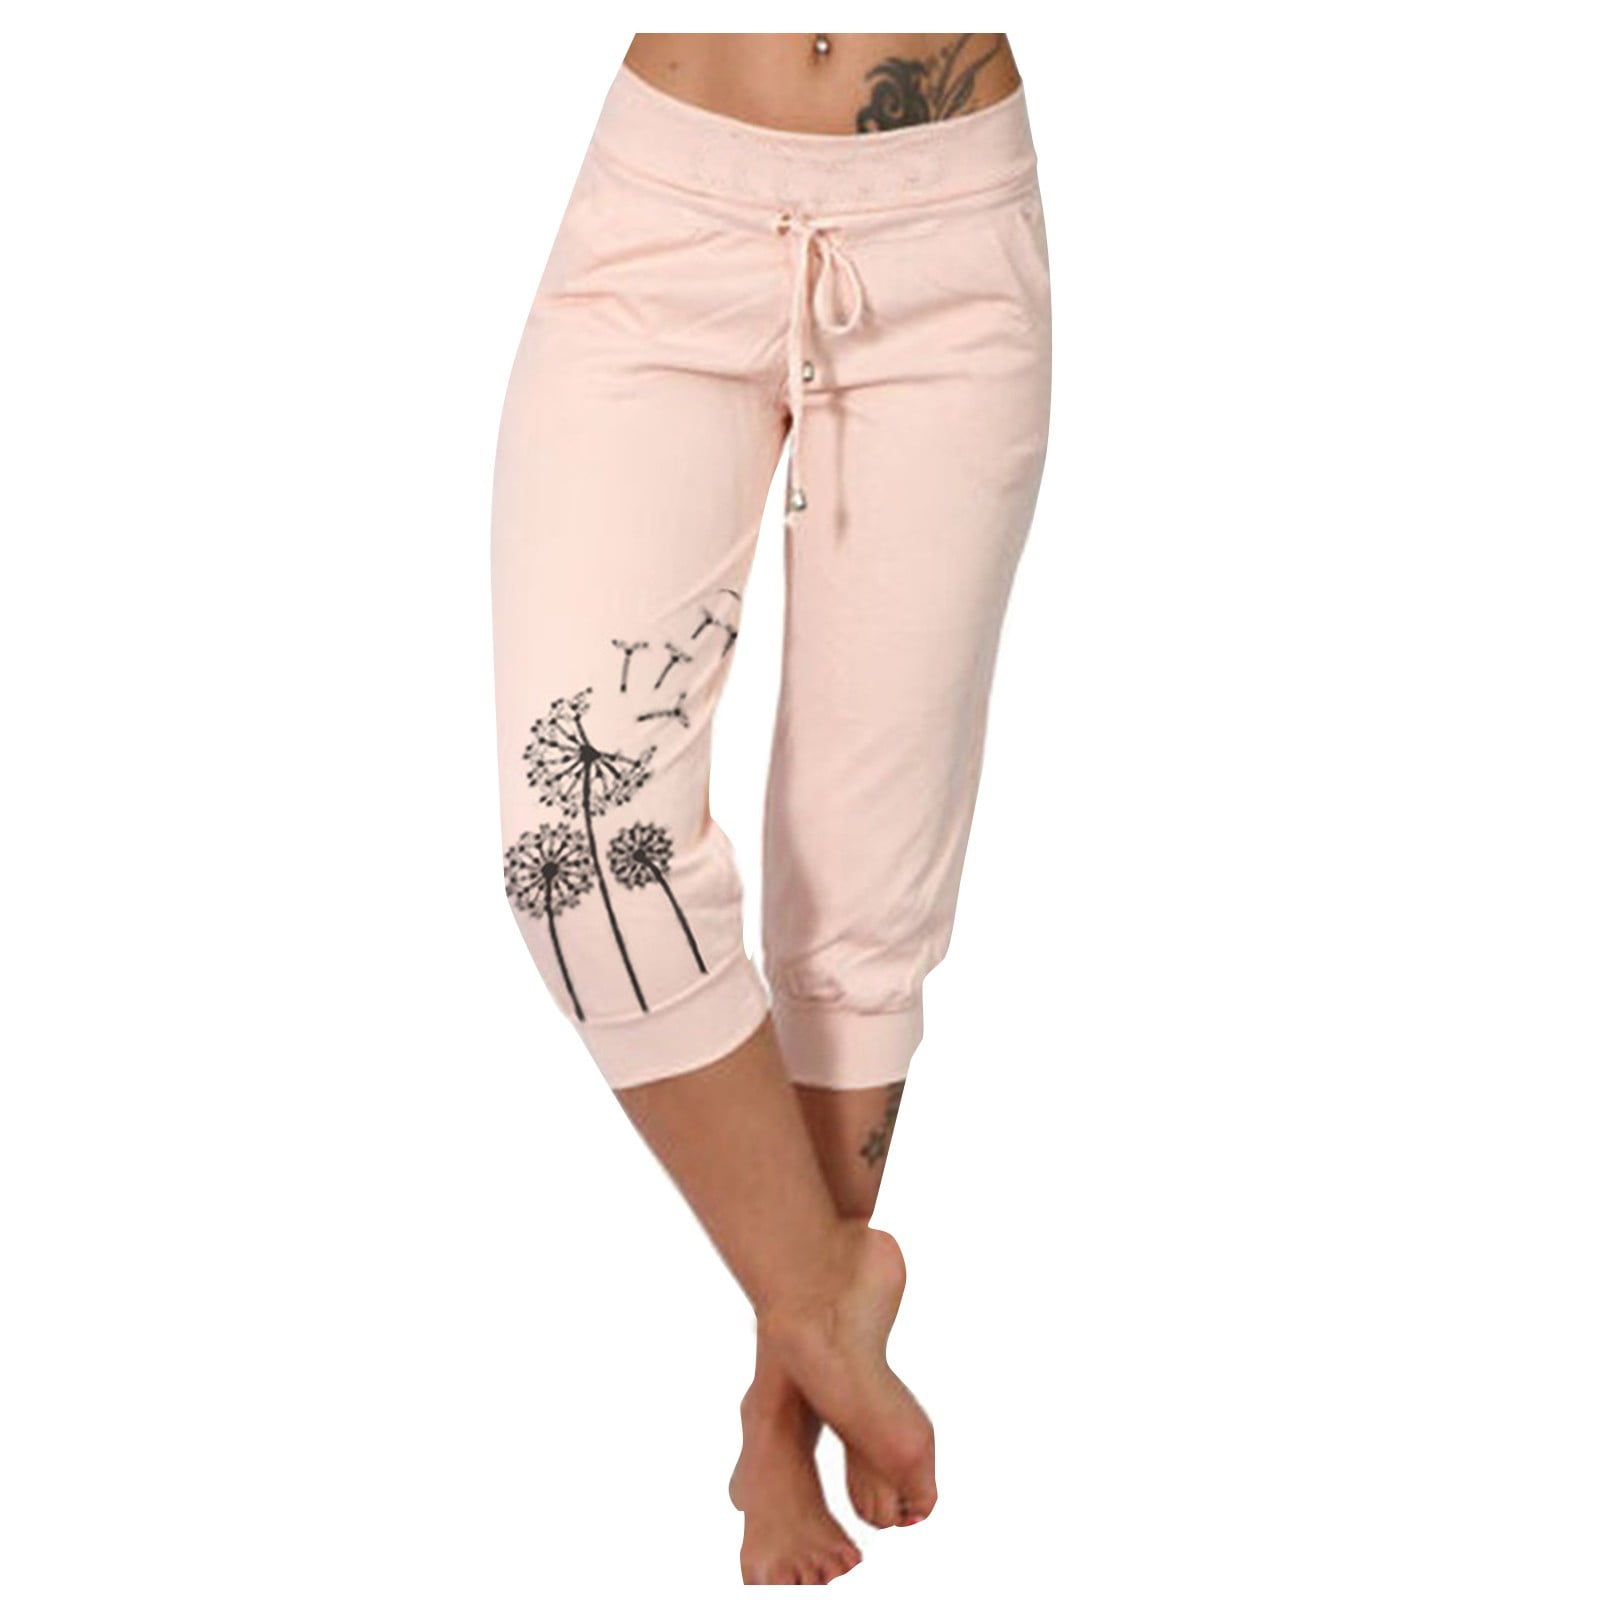 YWEFSJ Cotton Pants for Women Loose Fit Ankle Length Pants for Women  Straight Leg Sweatpants for Women Casual Capri Pants Lightweight Summer  Pants Womens Work Leggings Athletic Pants Pant Athletic at